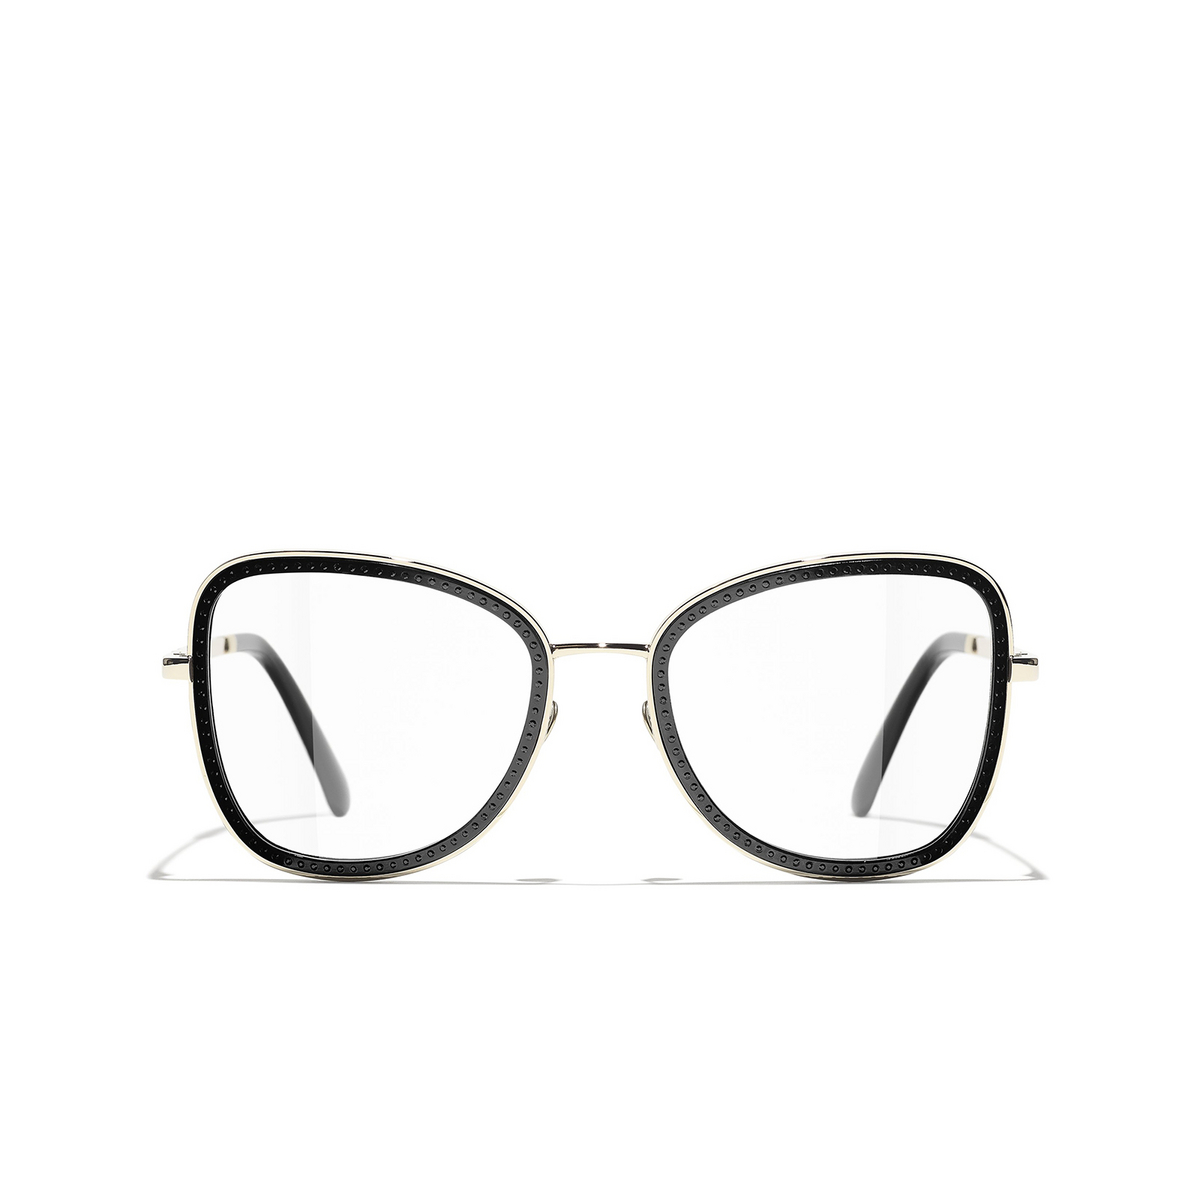 CHANEL square Eyeglasses C395 Gold - front view